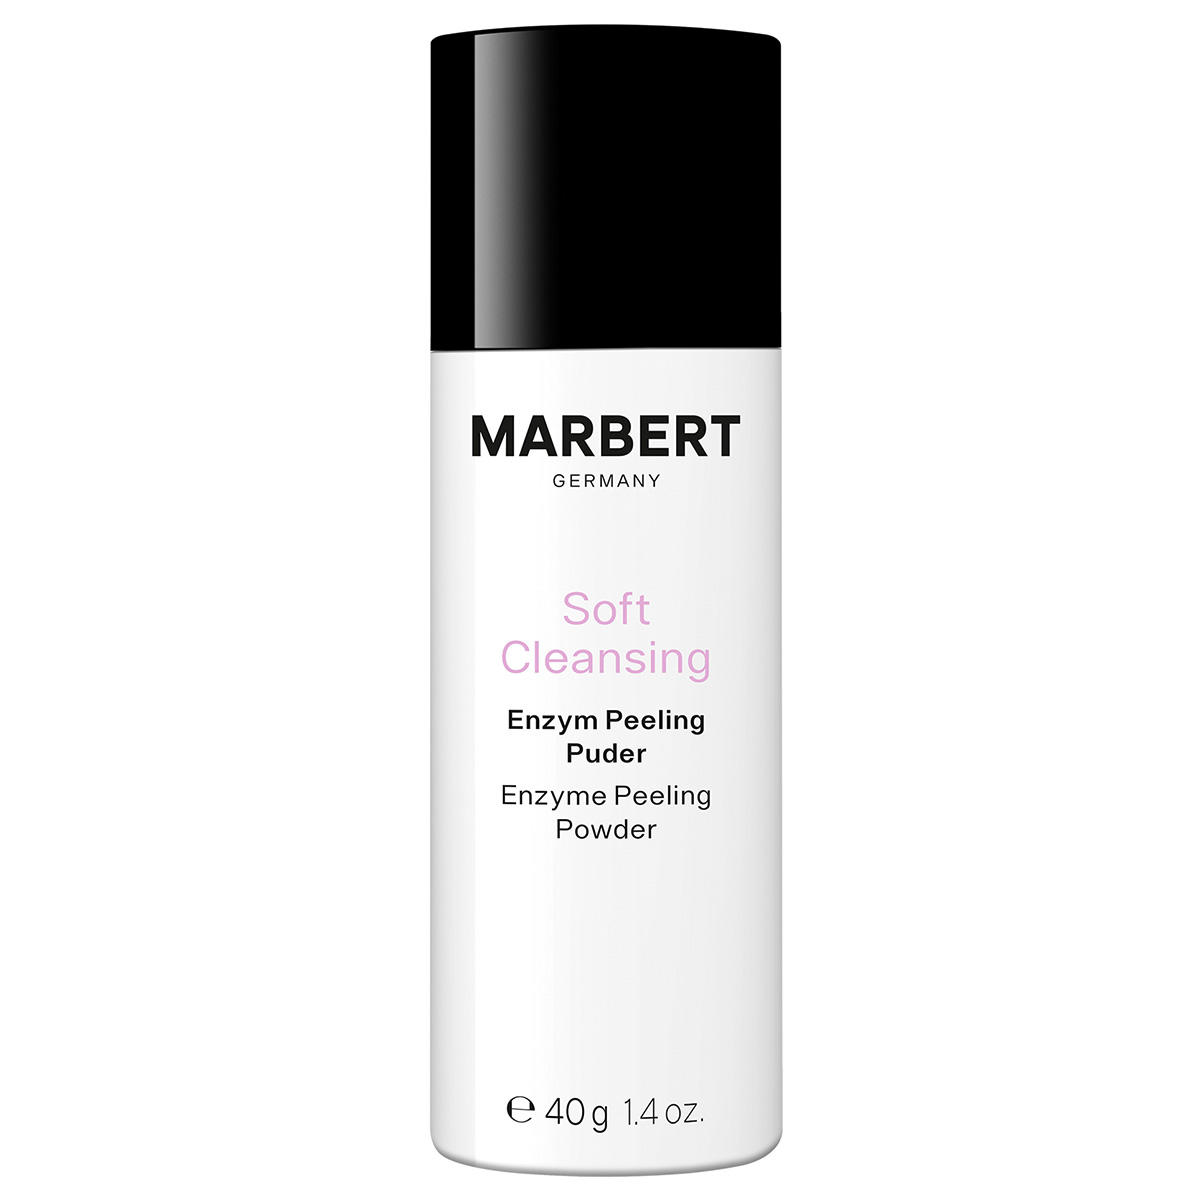 Marbert Soft Cleansing Enzyme Peeling Poudre 40 g - 1